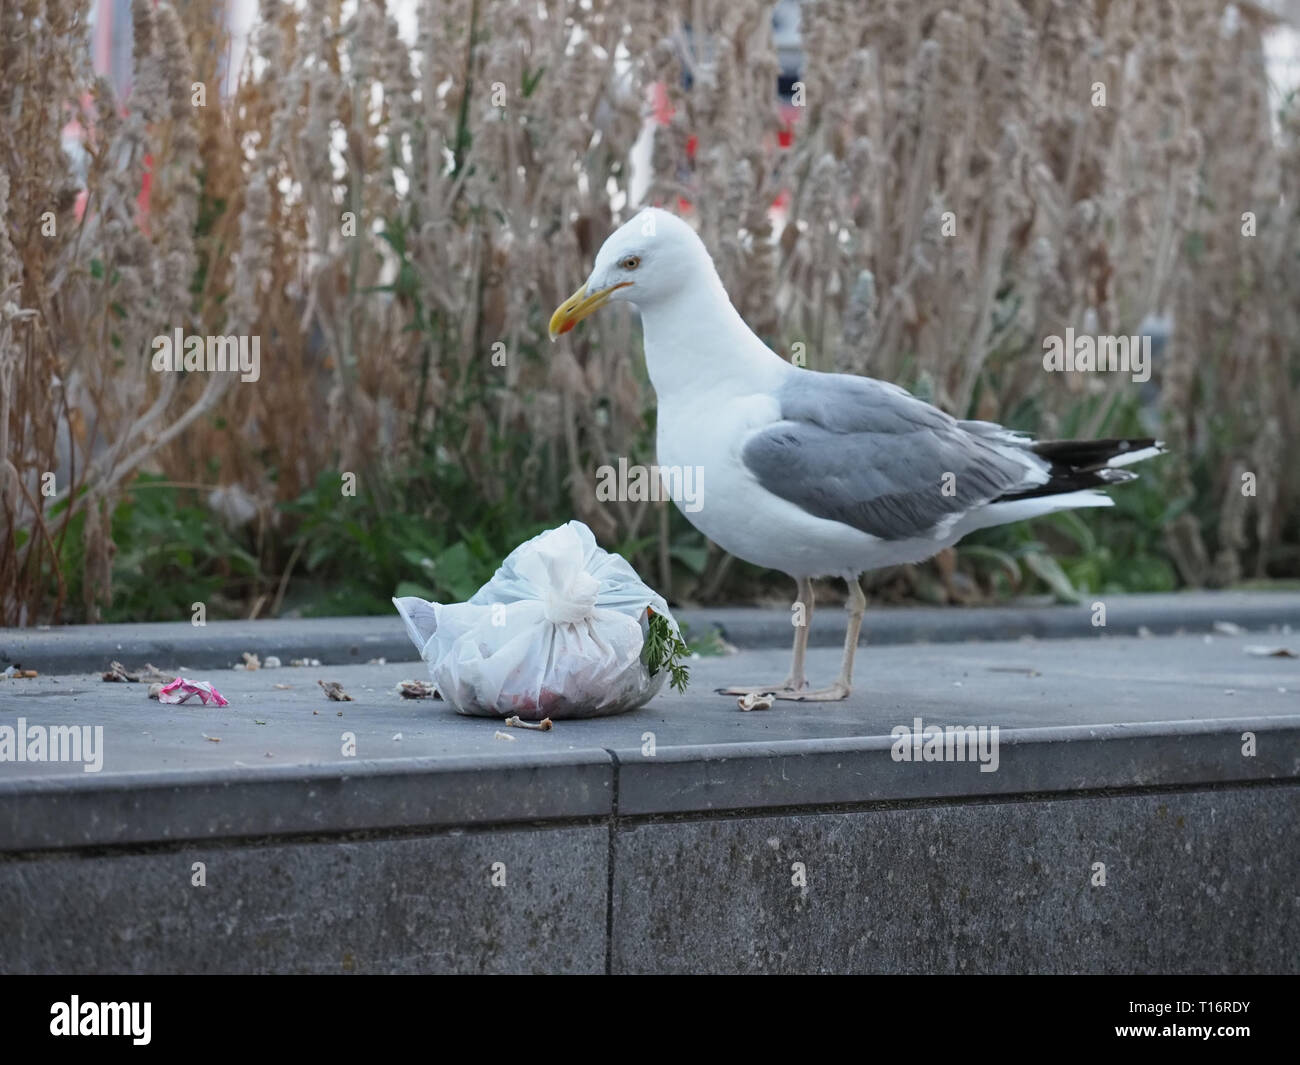 A seagull tears a garbage bag open. Stock Photo